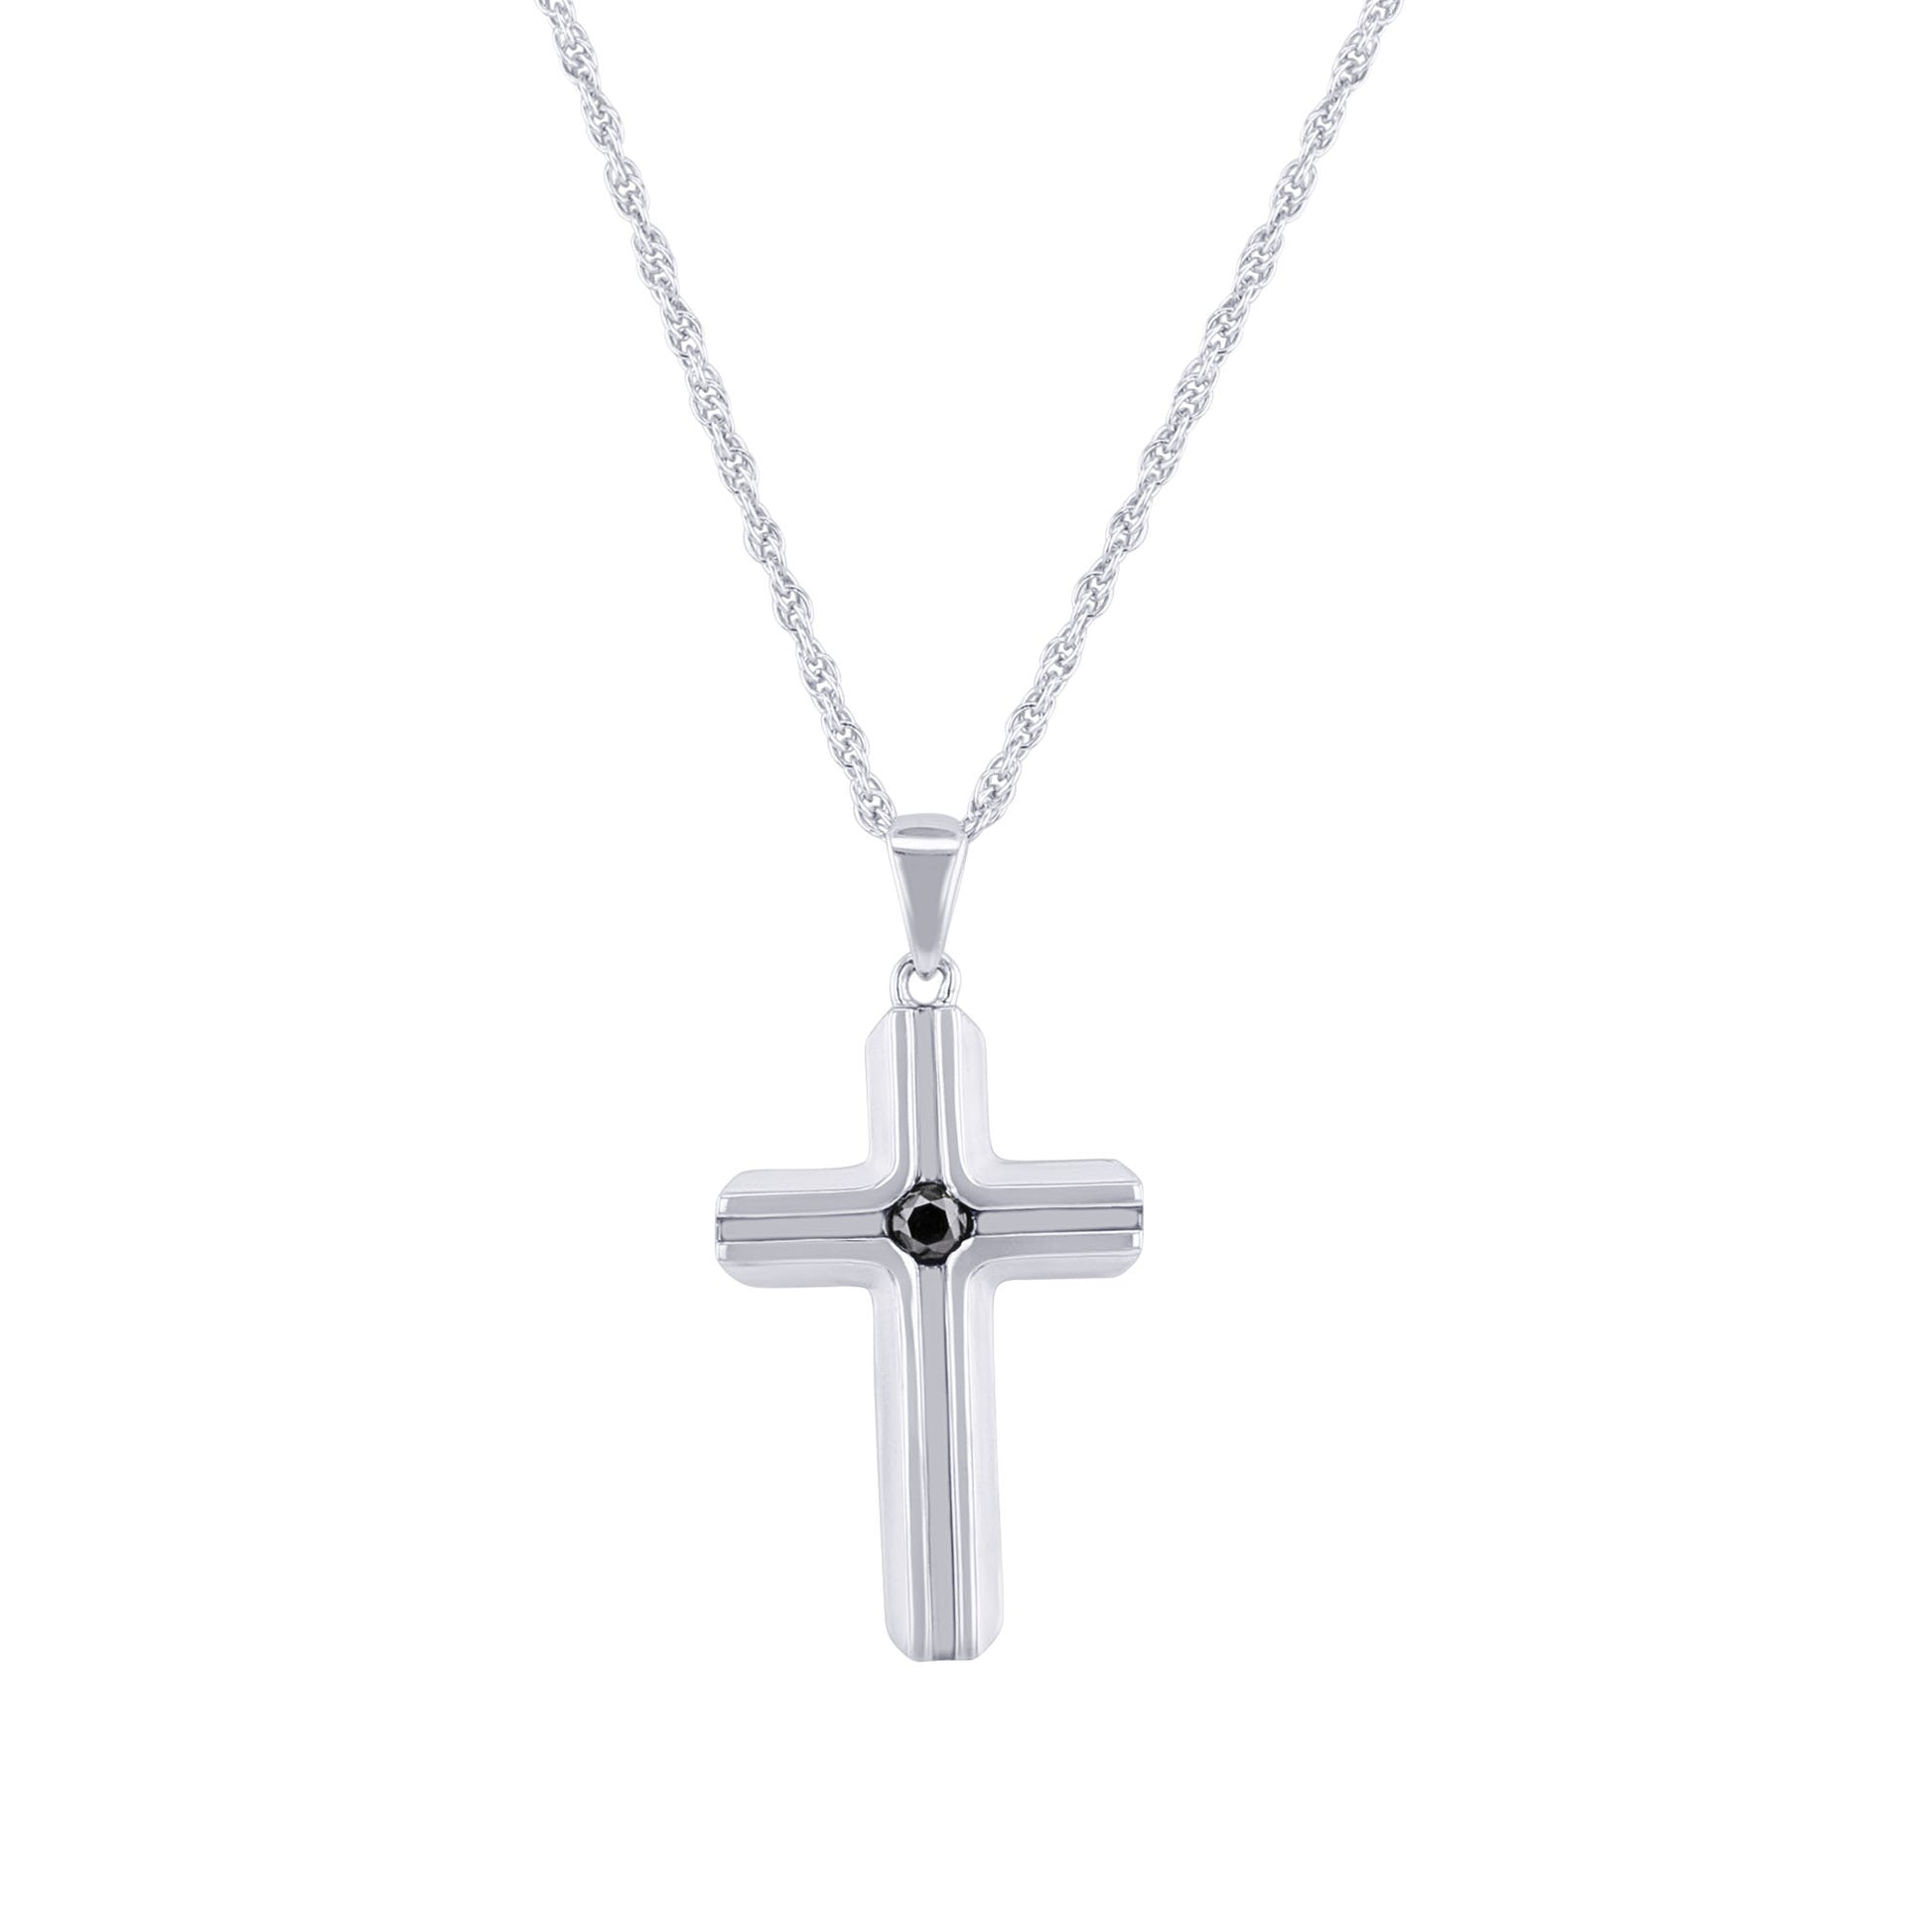 Silver and Black Cross Intersect Diamond Necklace